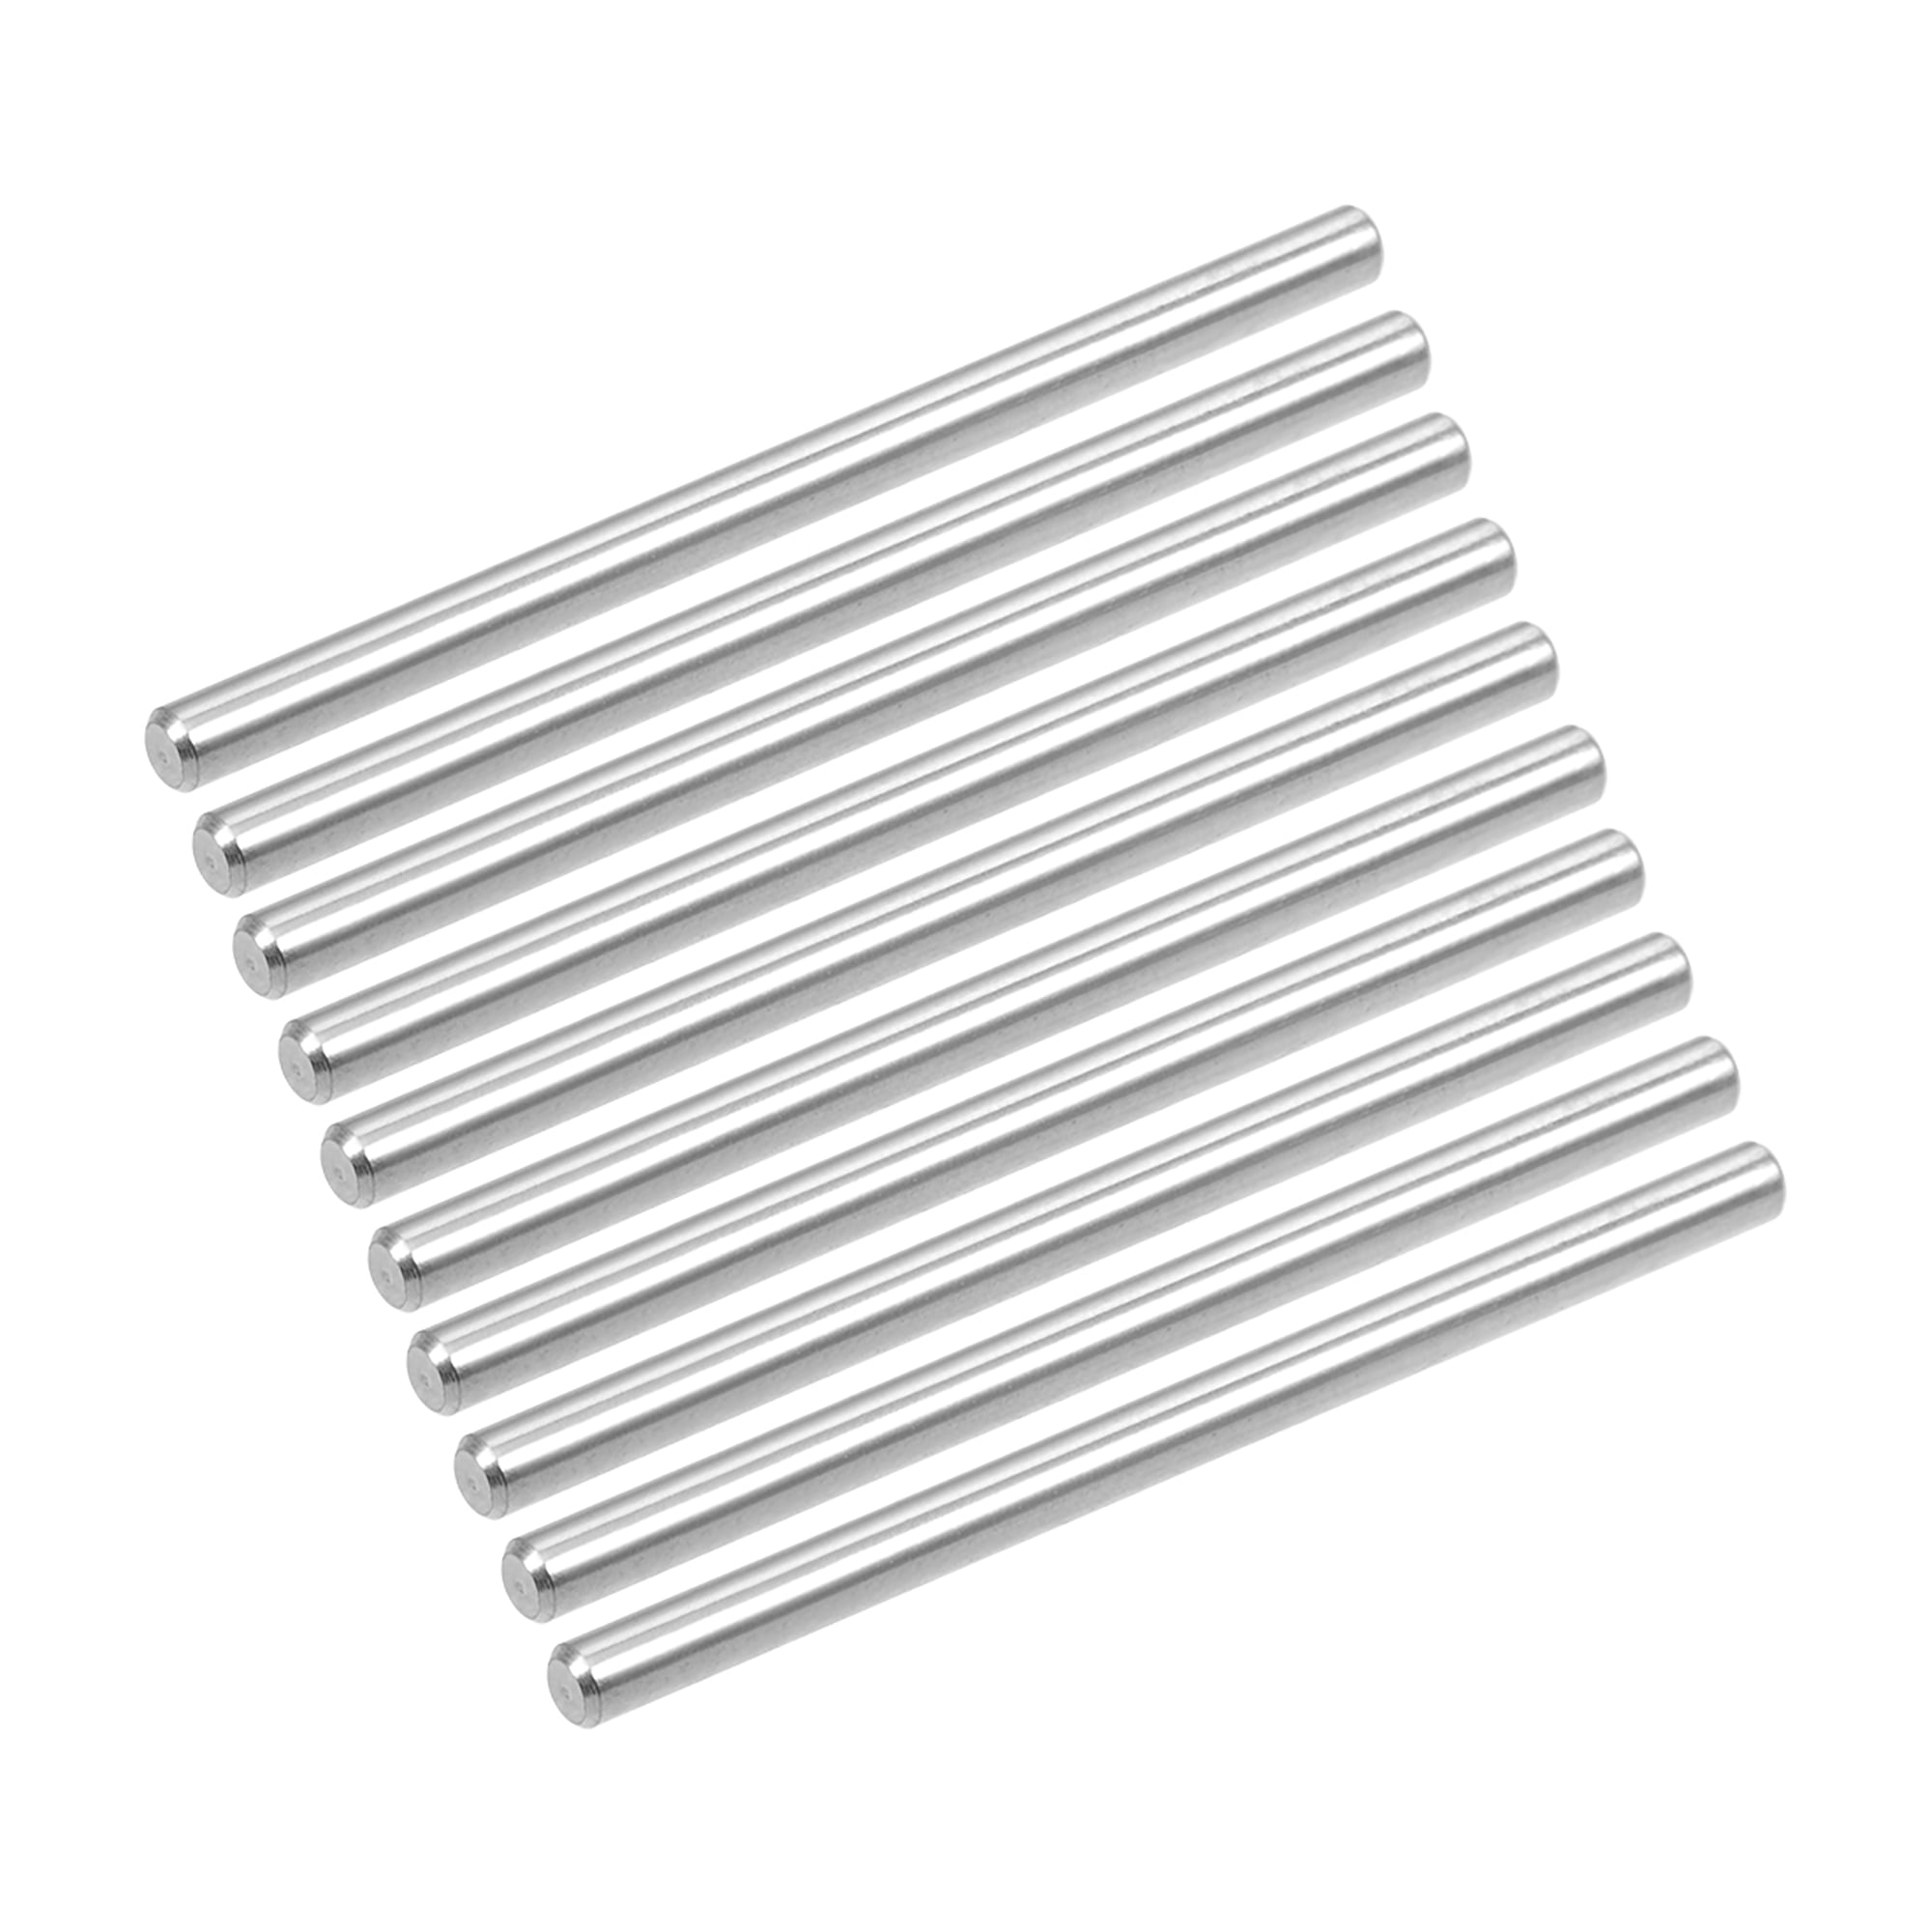 10pcs 3mmx50mm Dowel Pin 304 Stainless, Bunk Bed Dowel Size